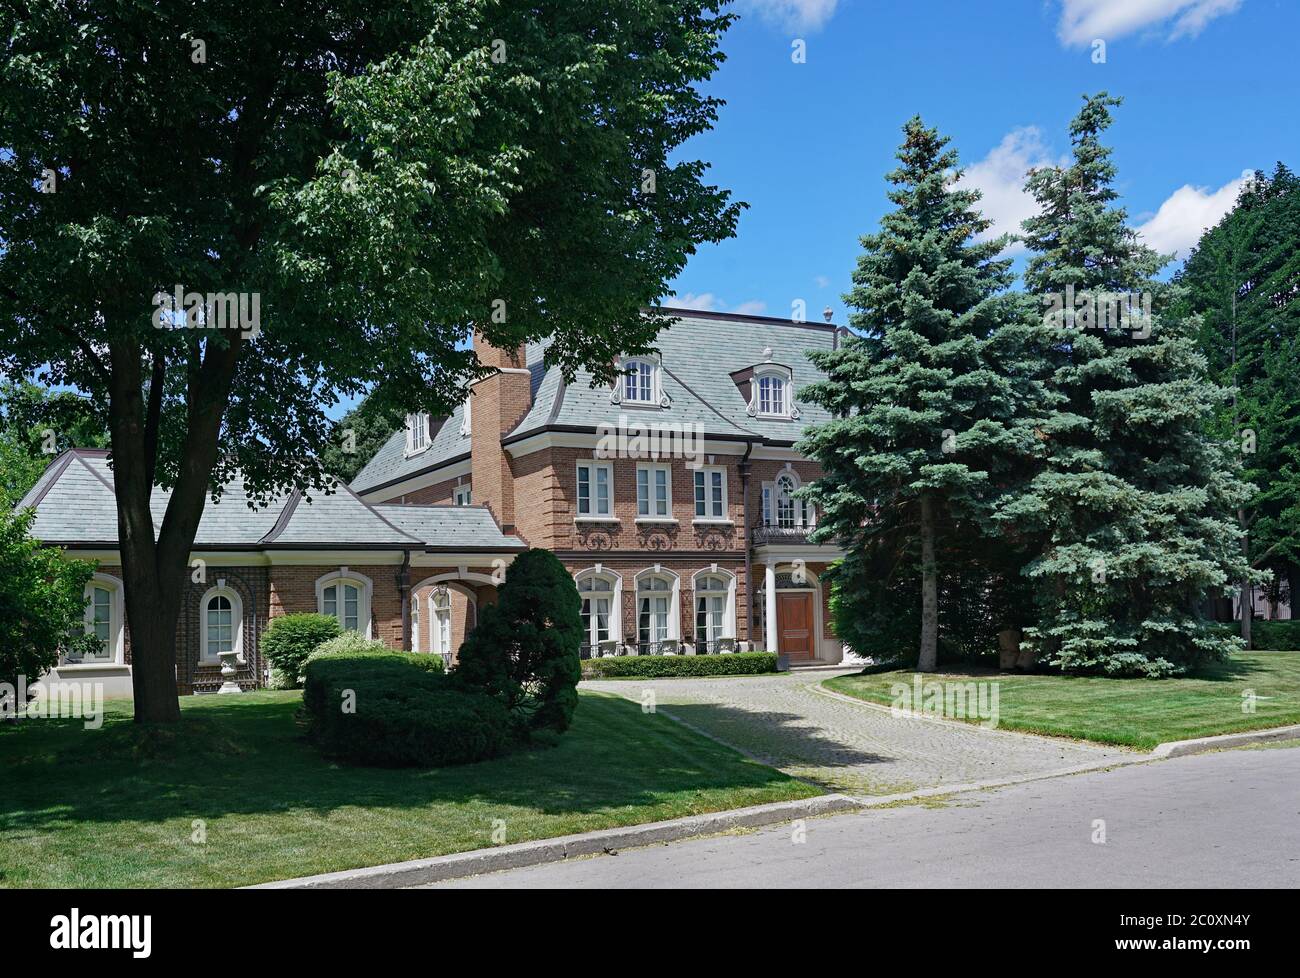 Toronto, Canada - June 12, 2020:  The Forest Hill area of Toronto has large houses on attractively landscaped lots. Stock Photo